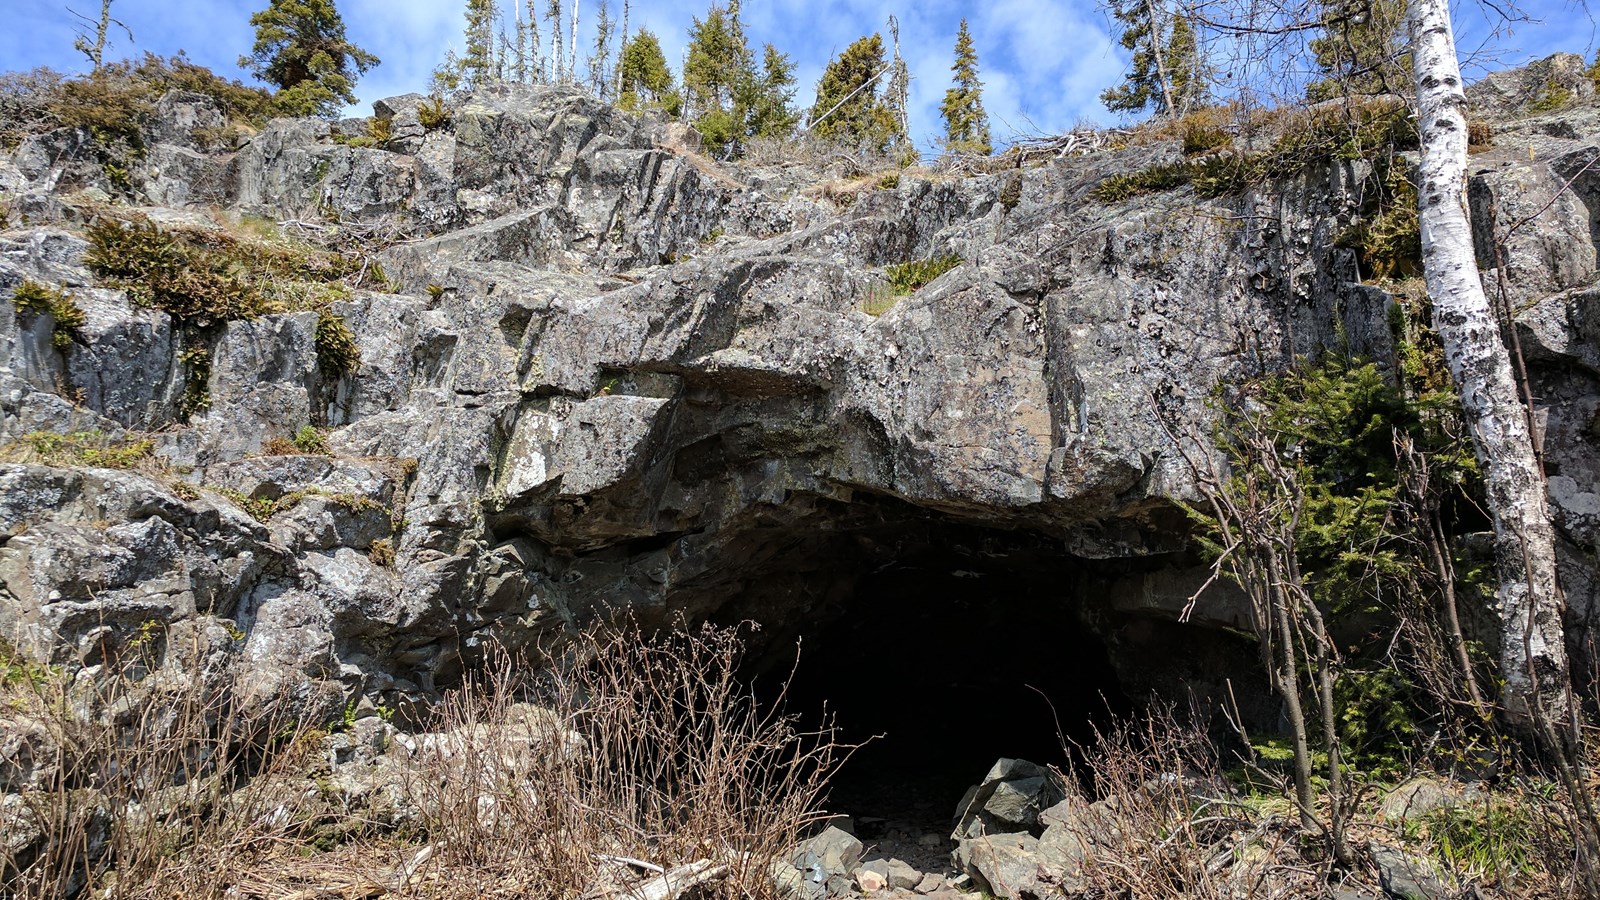 View of rocky outcropping with a dark cave. 